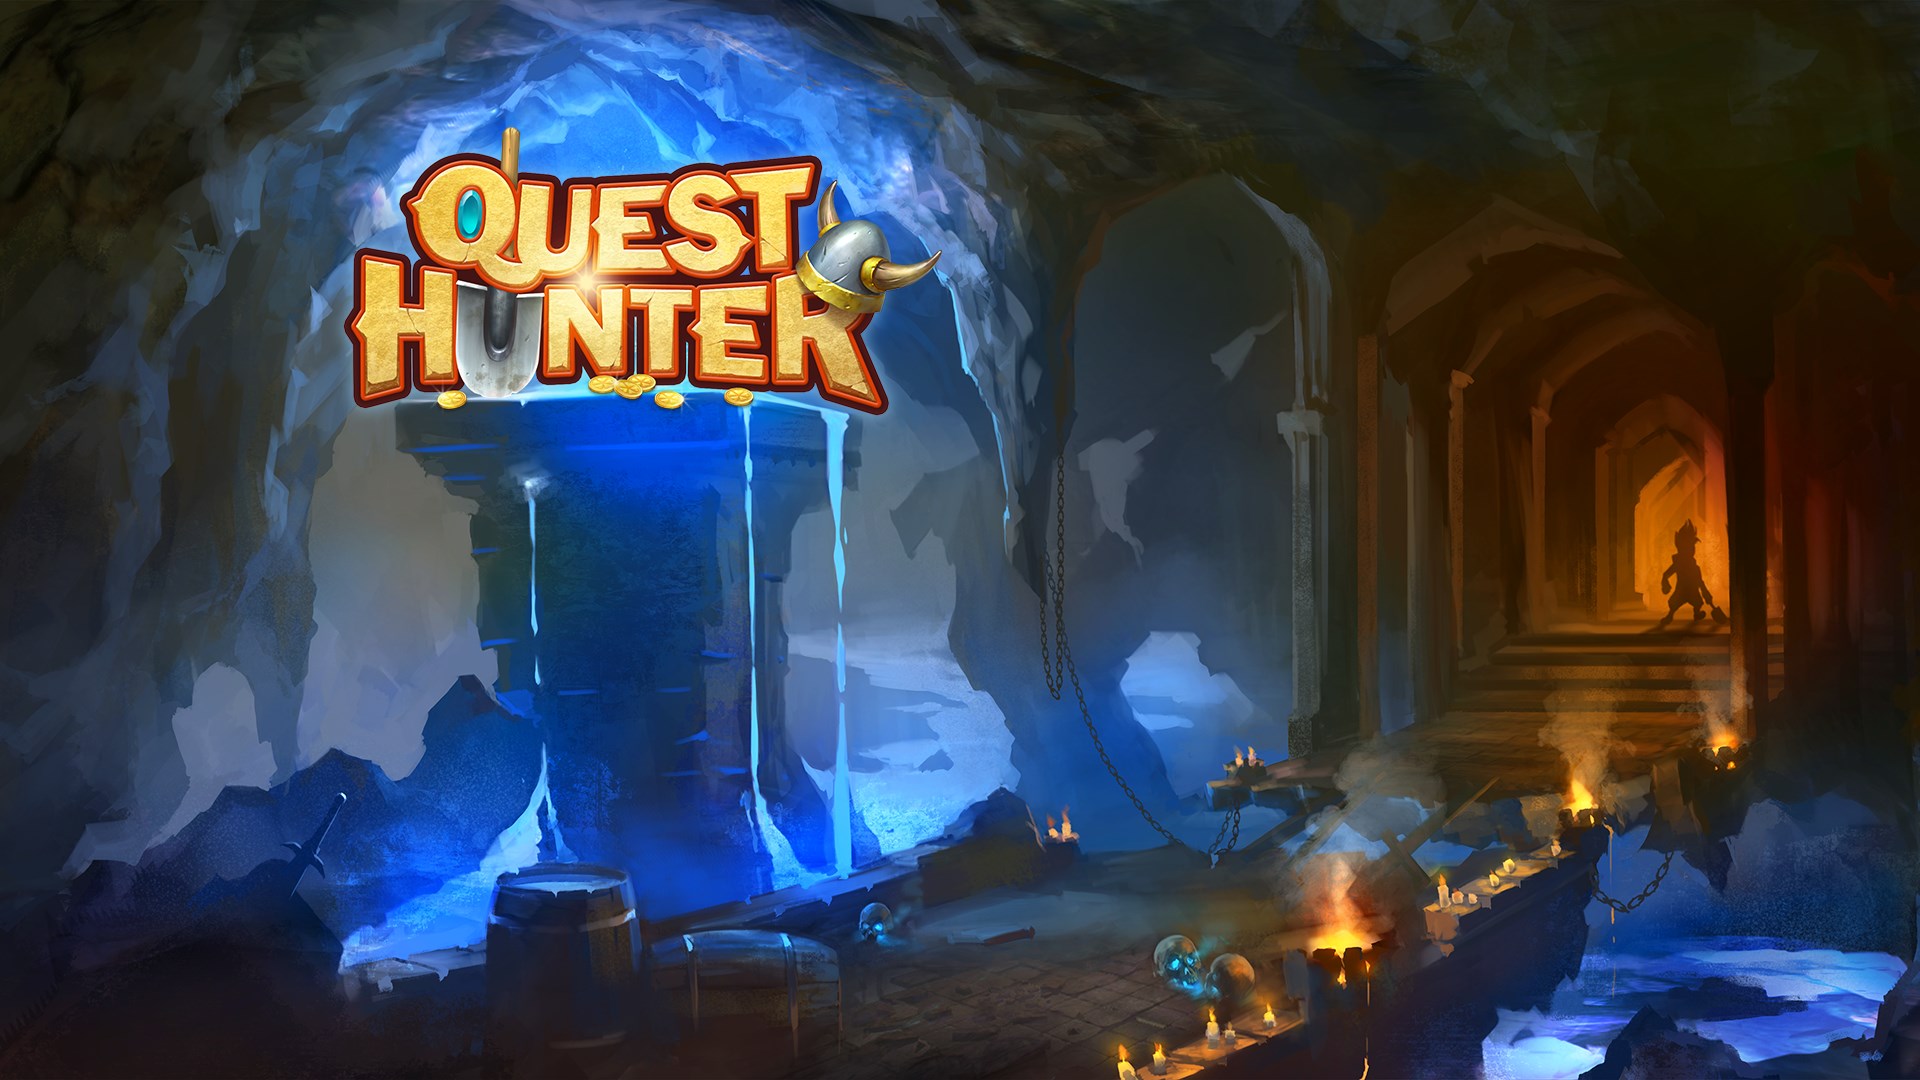 Video For Quest Hunter Is Now Available For Xbox One And Windows 10 (Xbox Play Anywhere)